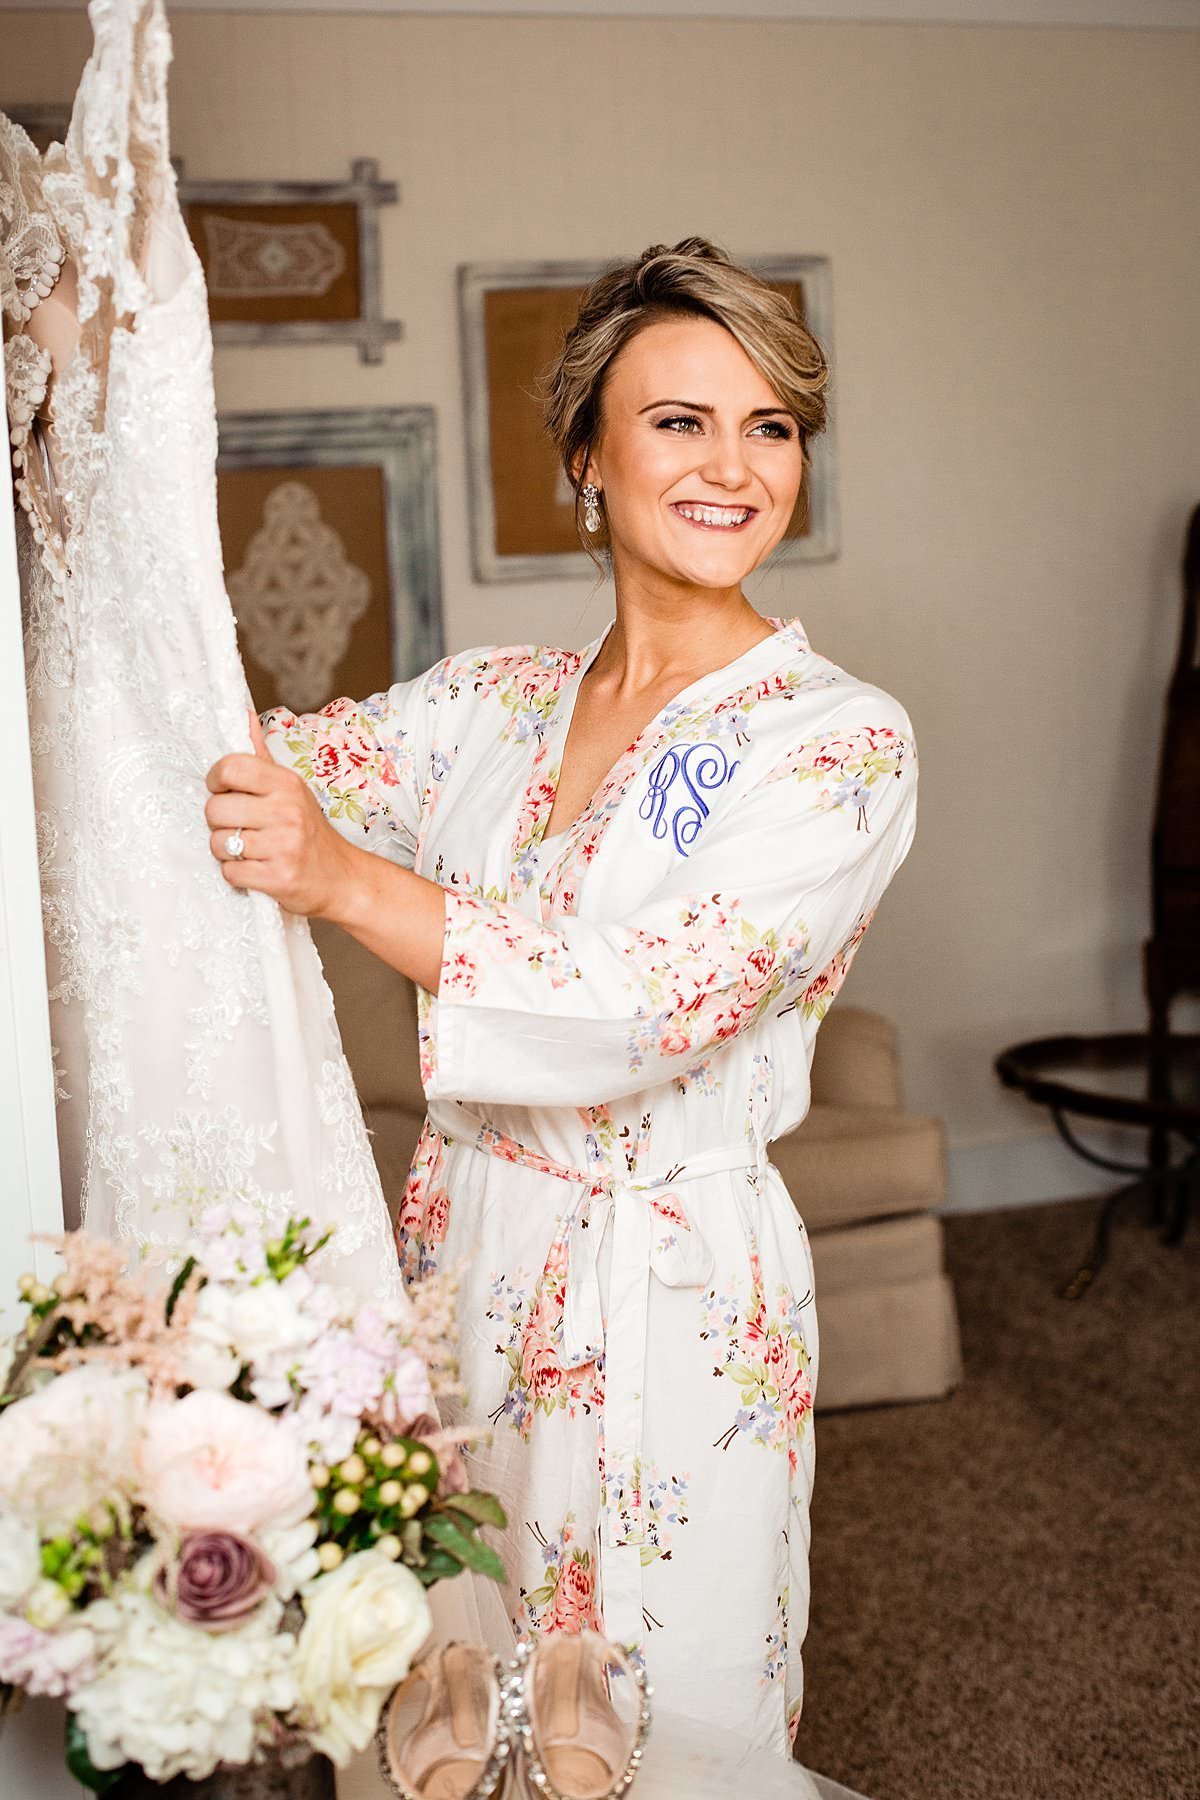 Bride is wearing a monogram white robe with flower pattern getting ready to take her dress off the hanger